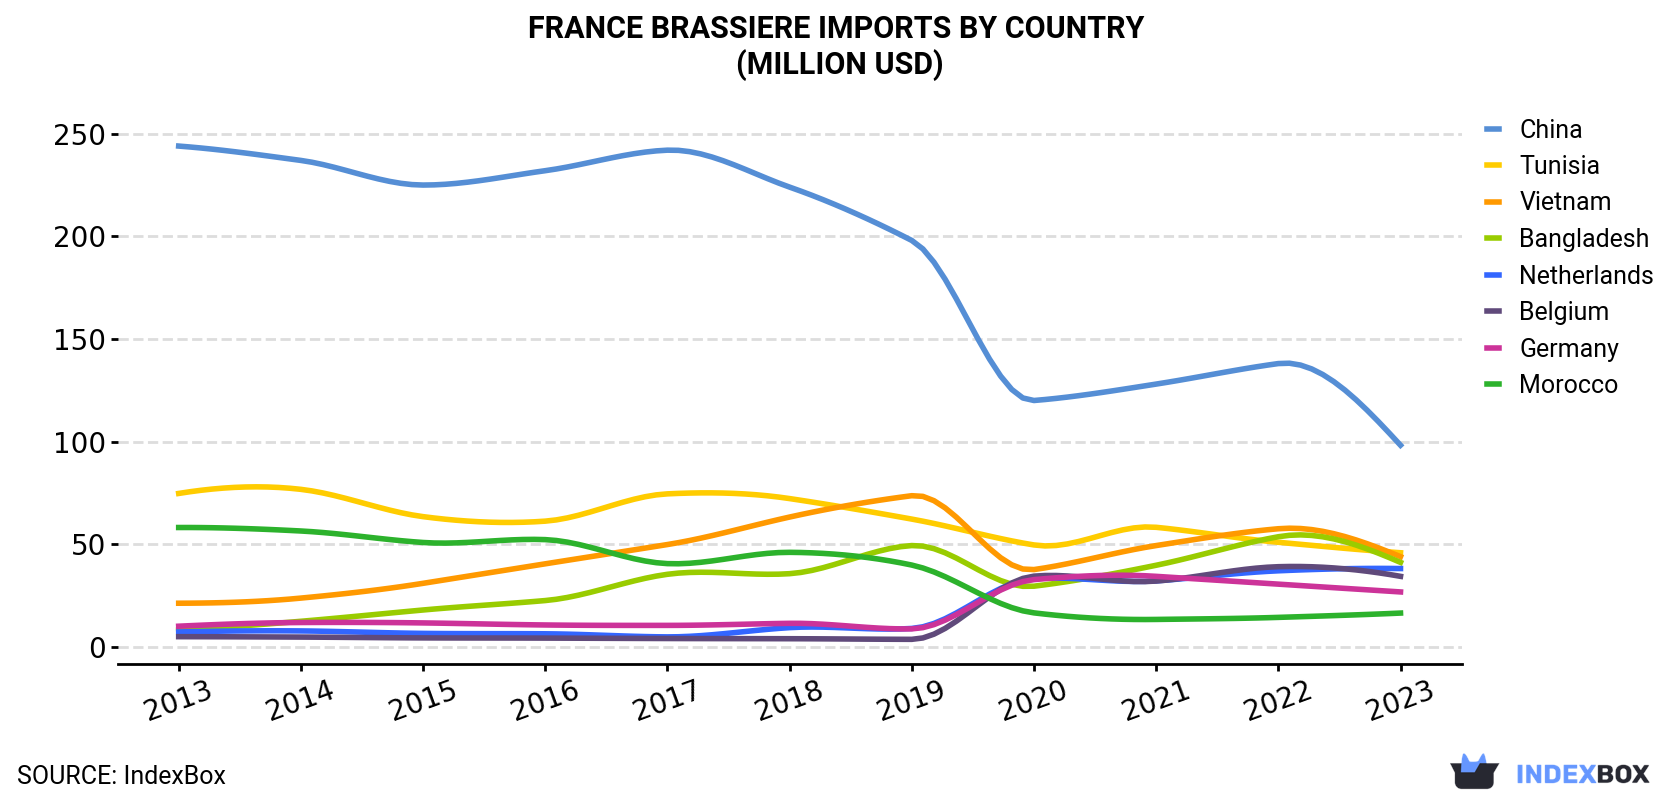 France Brassiere Imports By Country (Million USD)